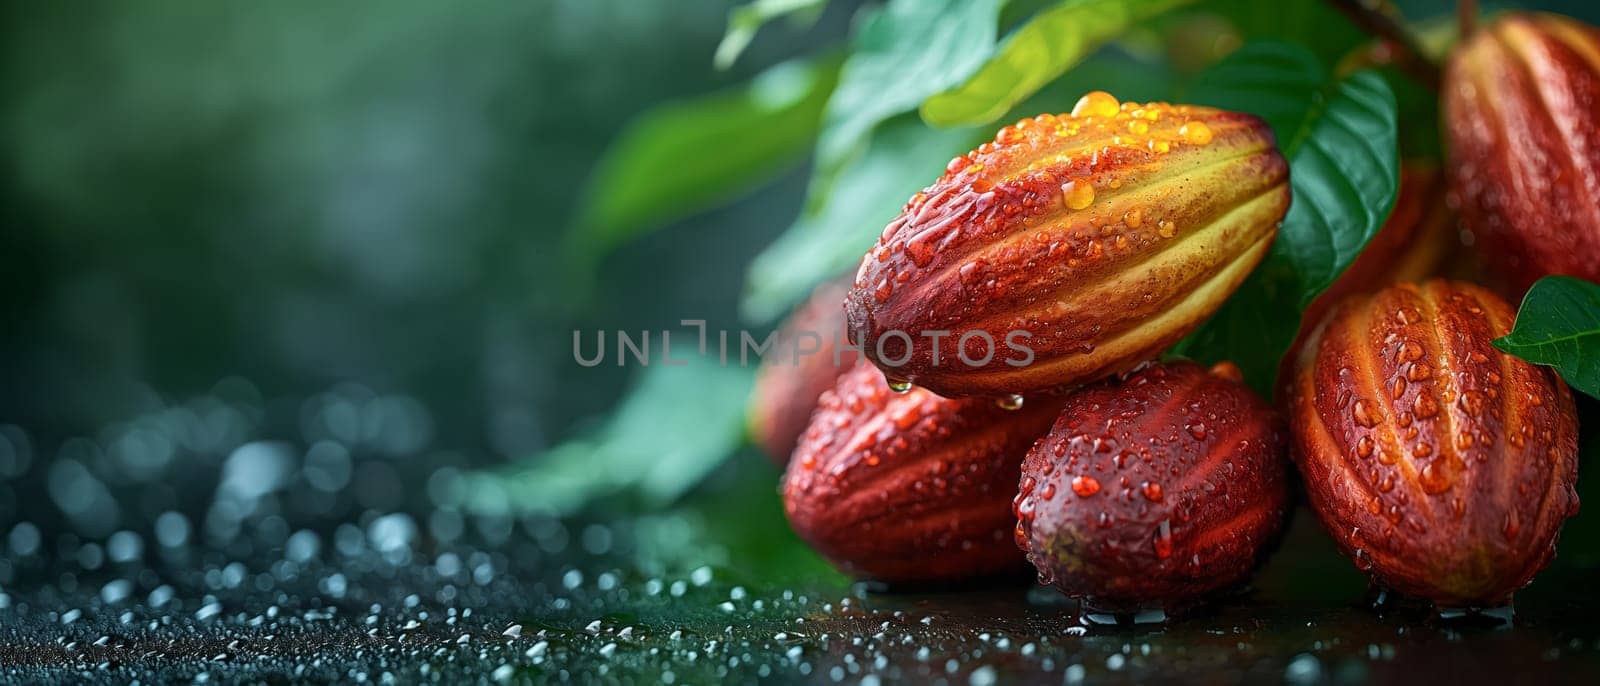 Abstract background with cocoa beans with leaves. by Fischeron